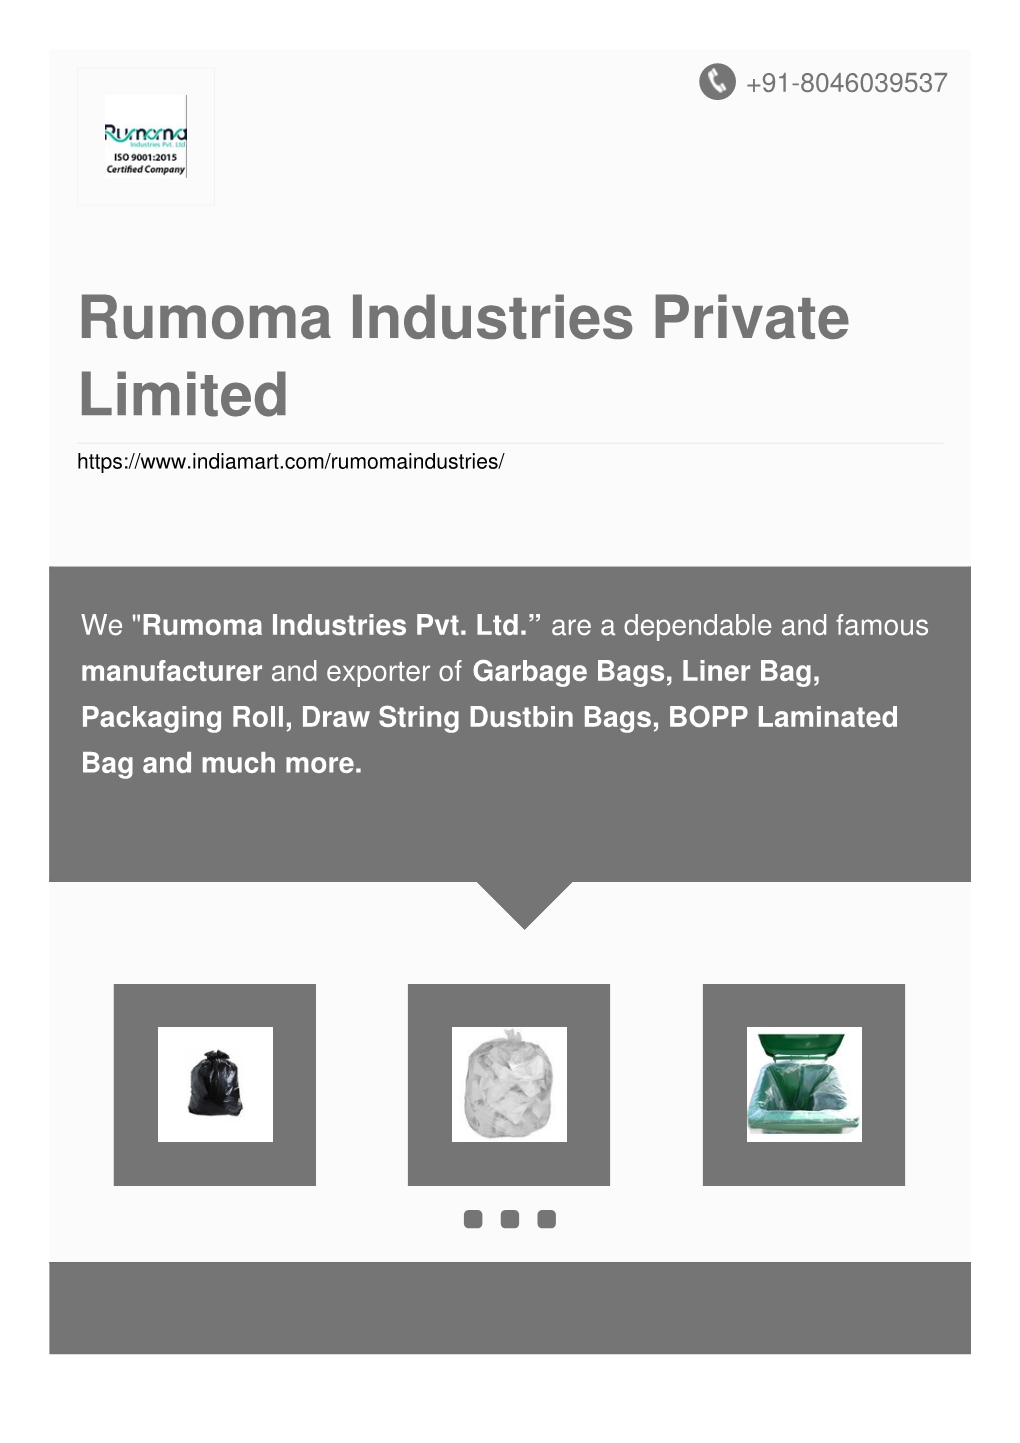 Rumoma Industries Private Limited